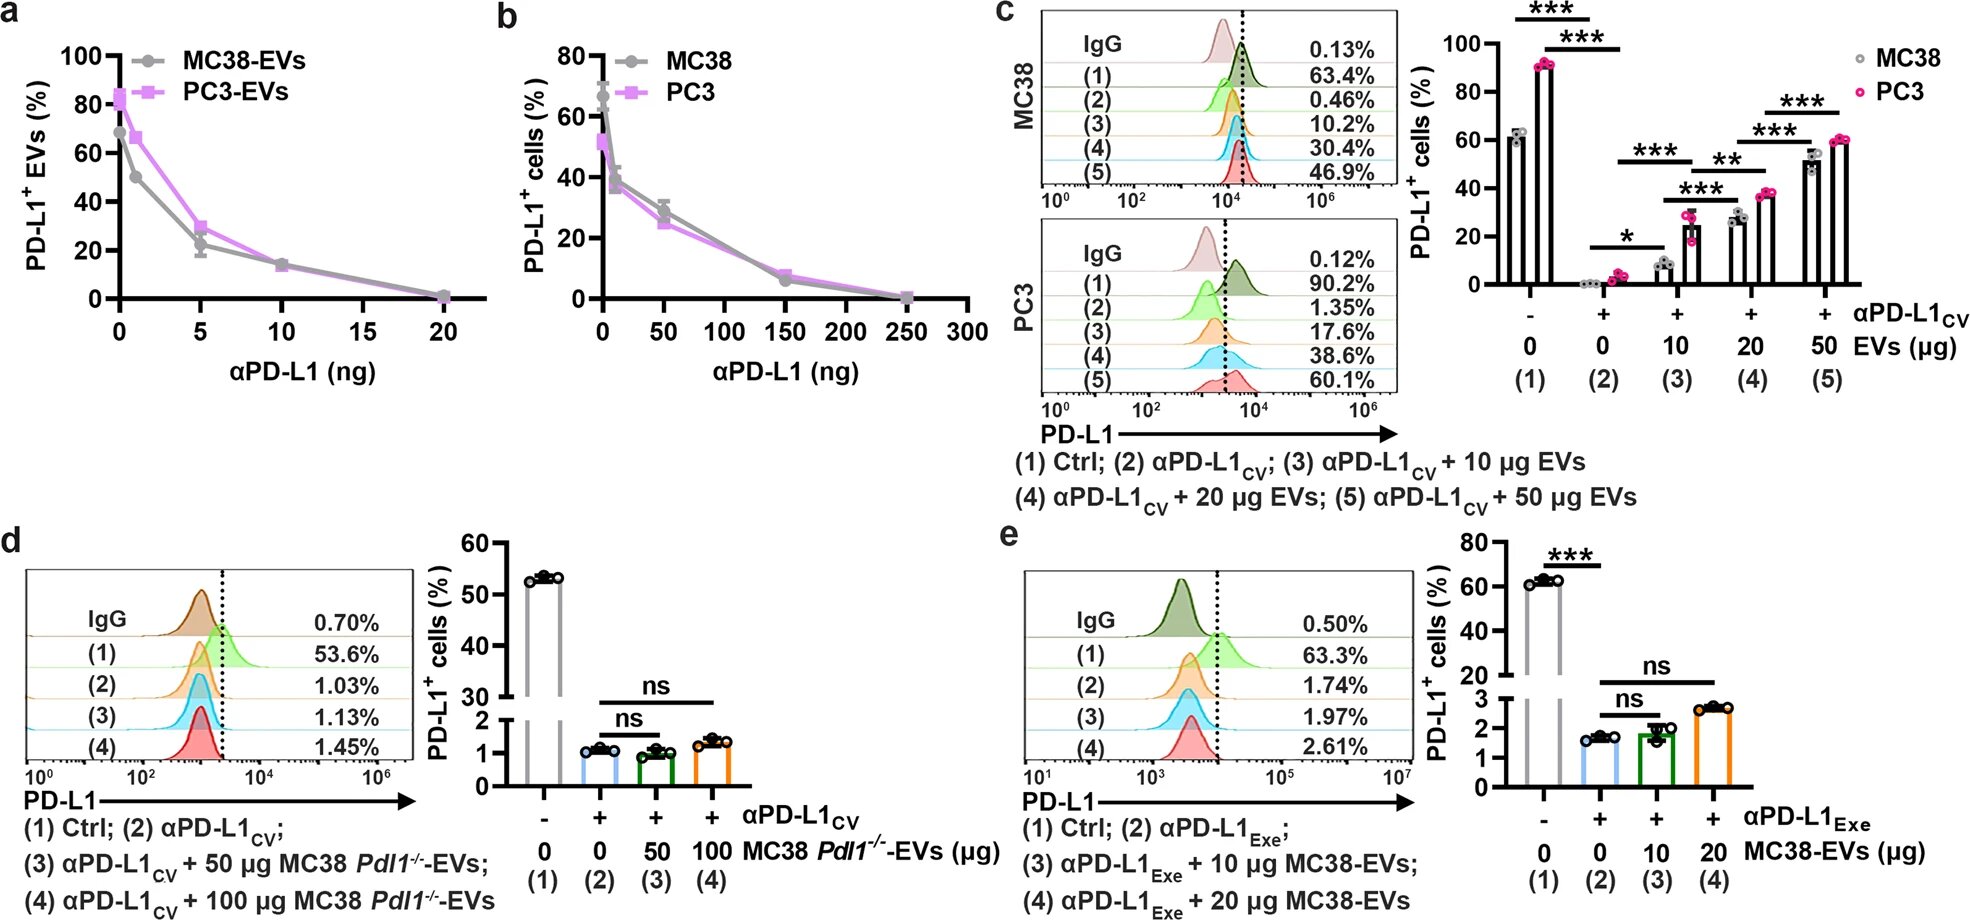 #Scientists reveal new TEV-mediated αPD-L1-specific therapy resistance mechanism